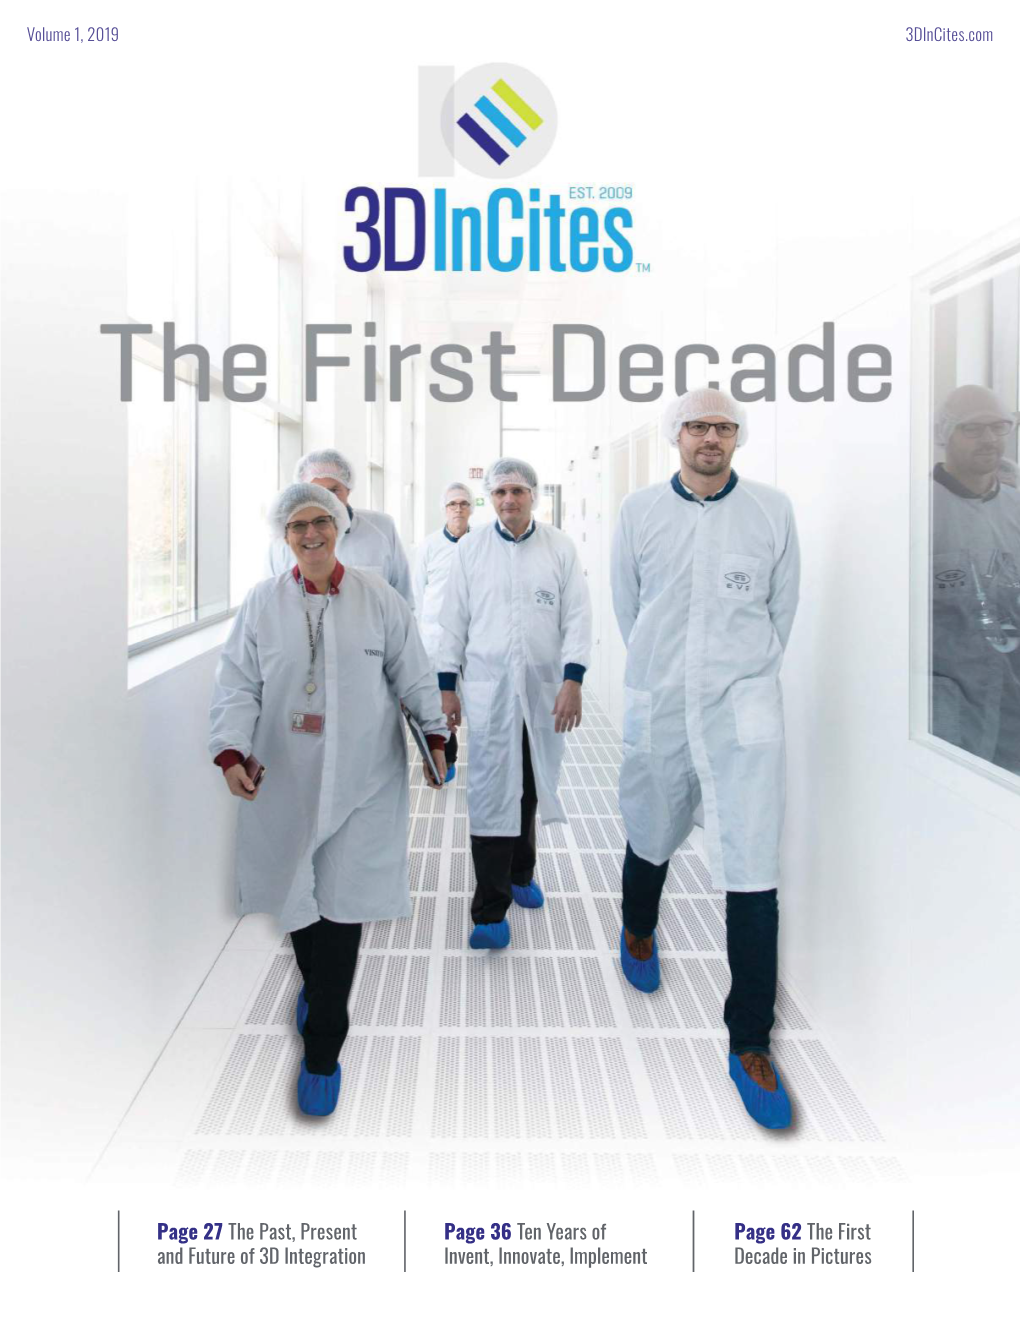 3D Incities the First Decade Magazine